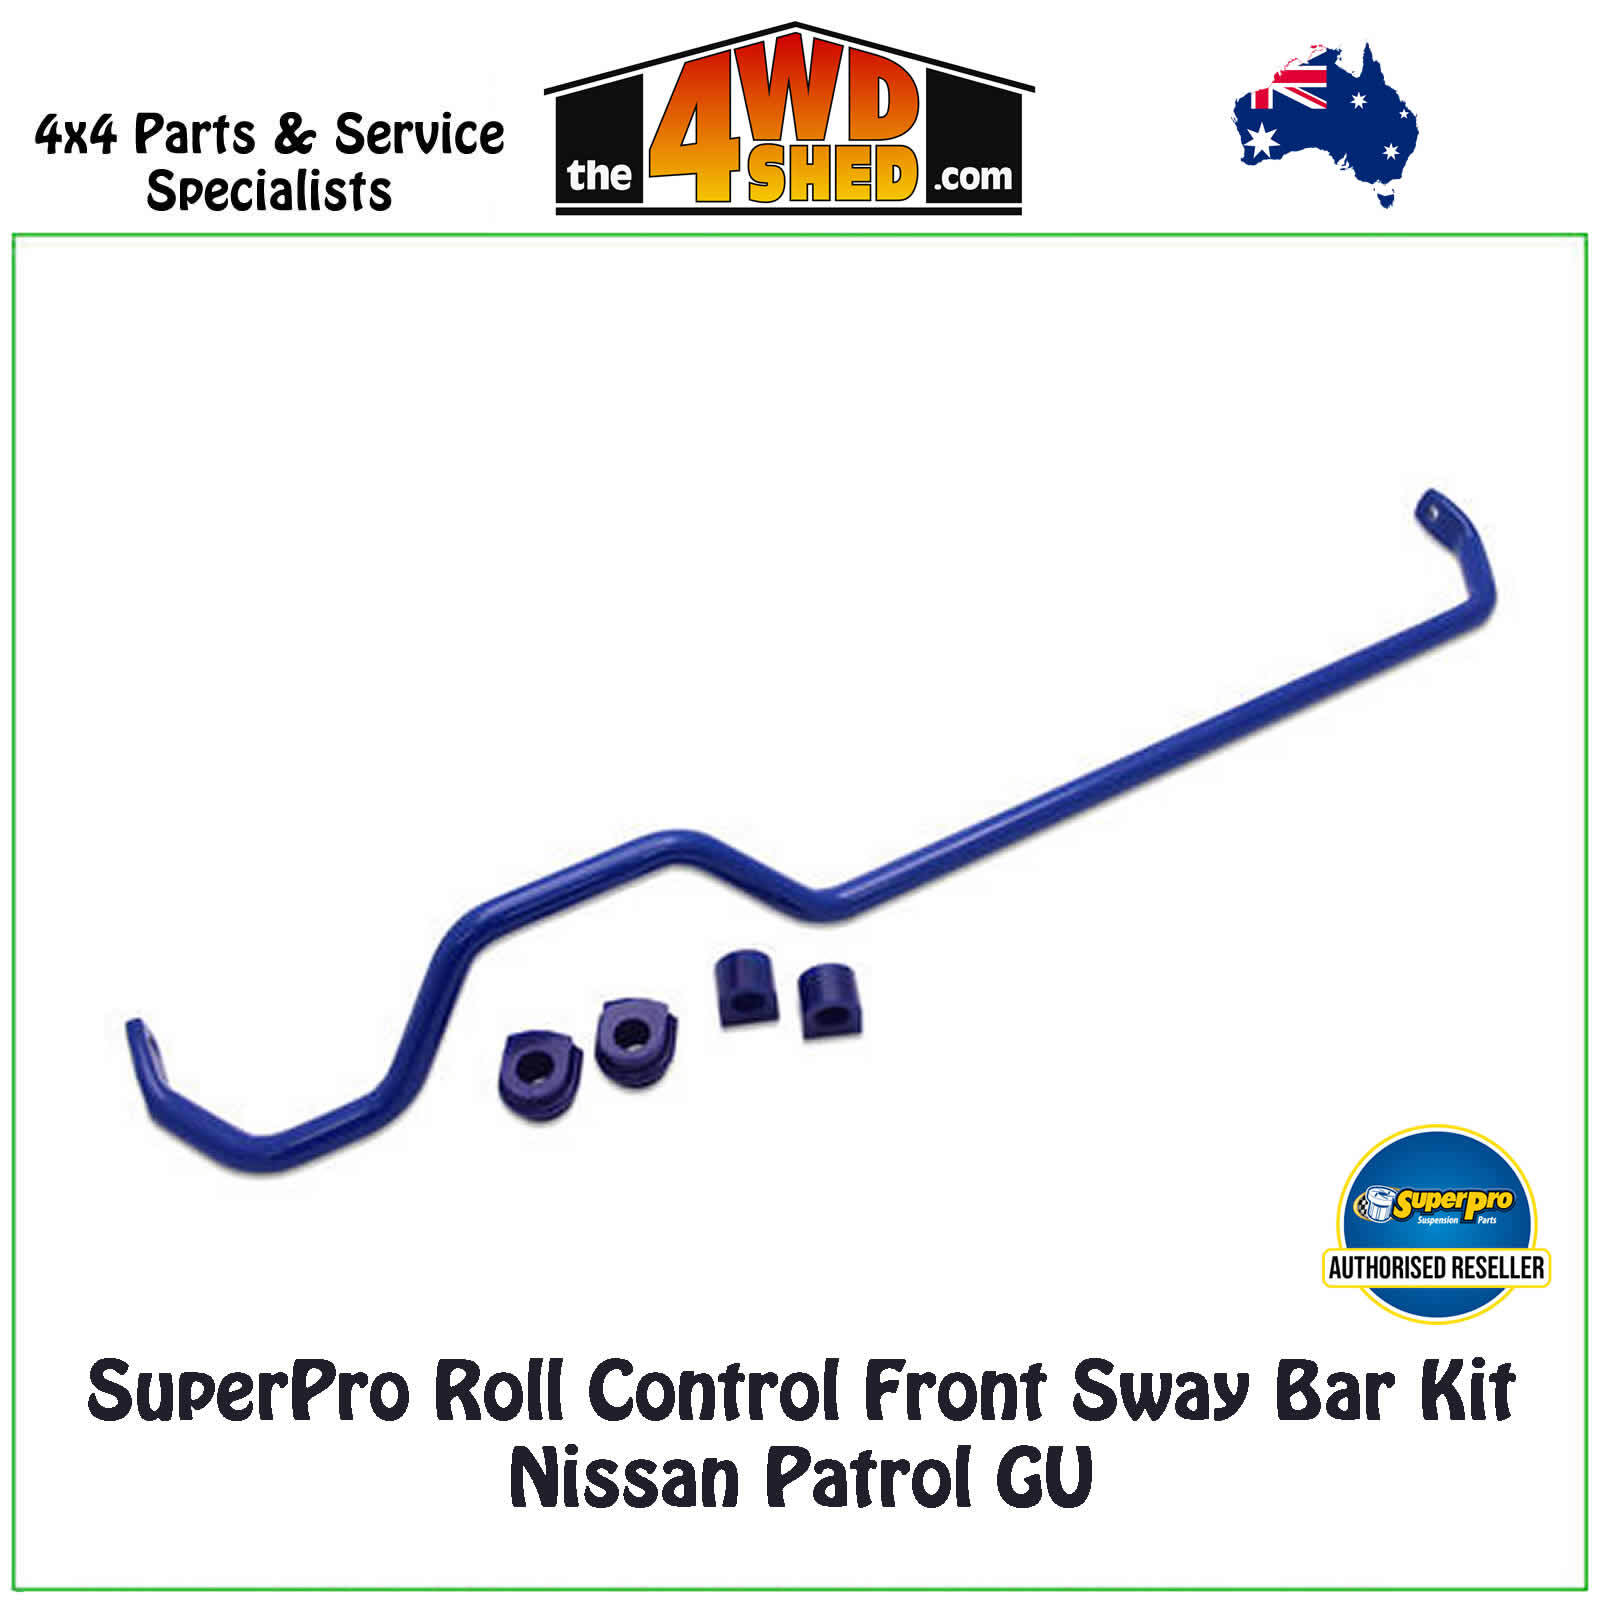 Why Fit Anti-Roll Bars to a 4WD / 4X4?